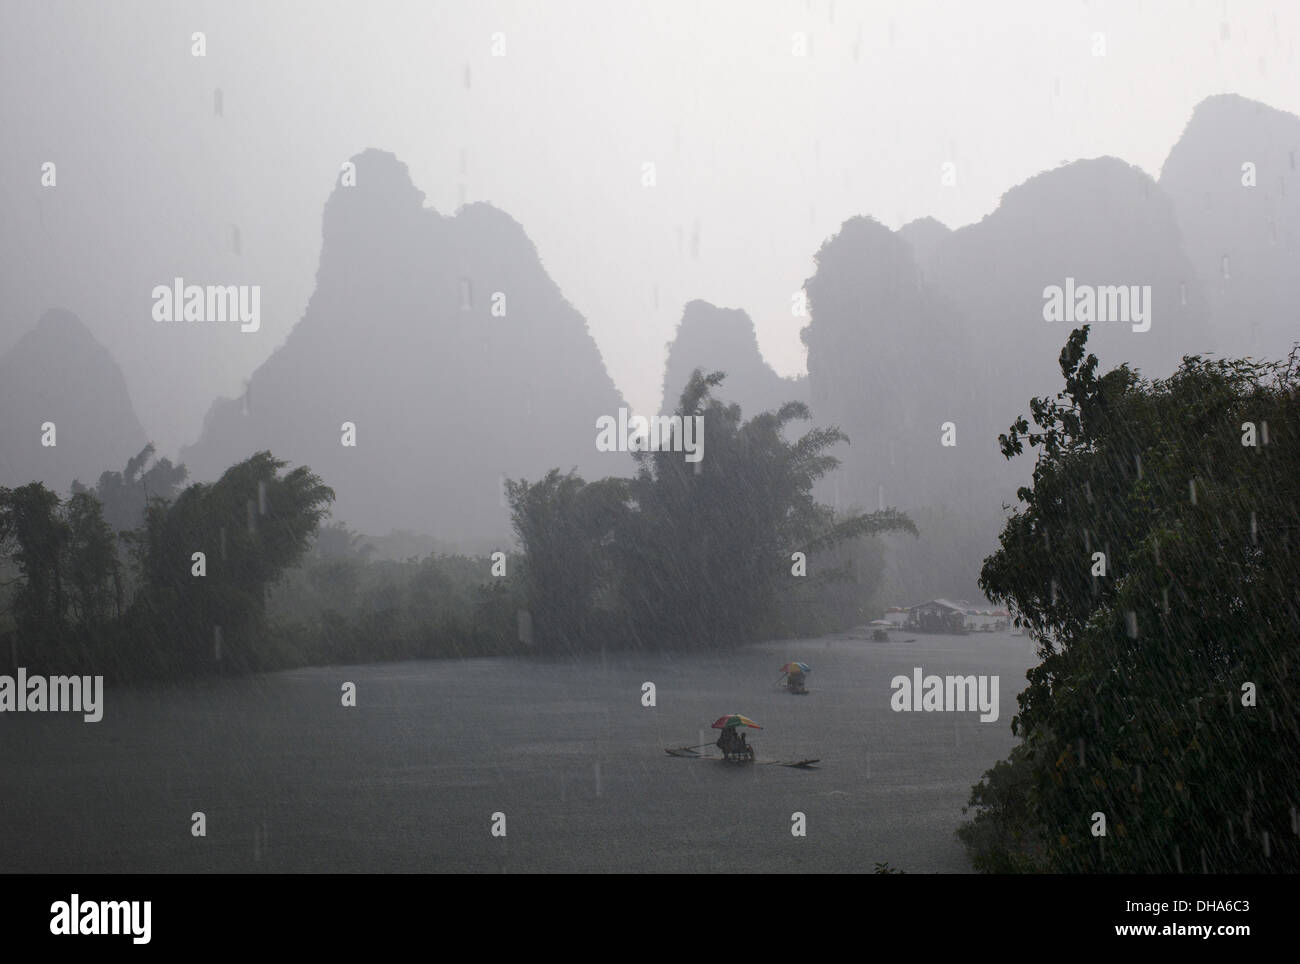 Boats On The River On A Rainy Day; Yangshuo, China Stock Photo